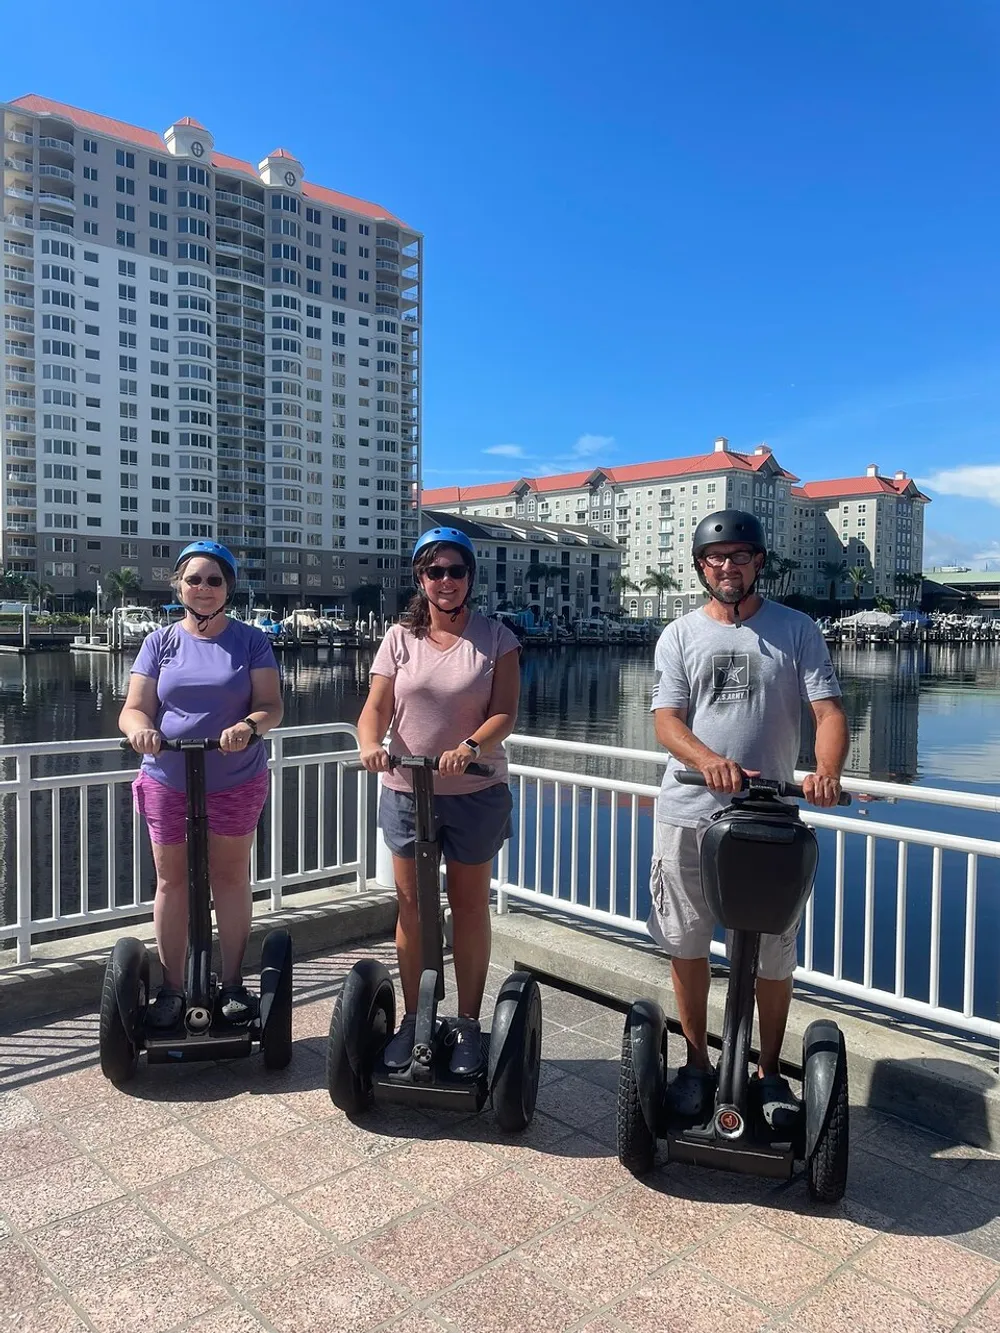 Three people wearing helmets are standing on Segways by a waterfront with buildings in the background on a sunny day